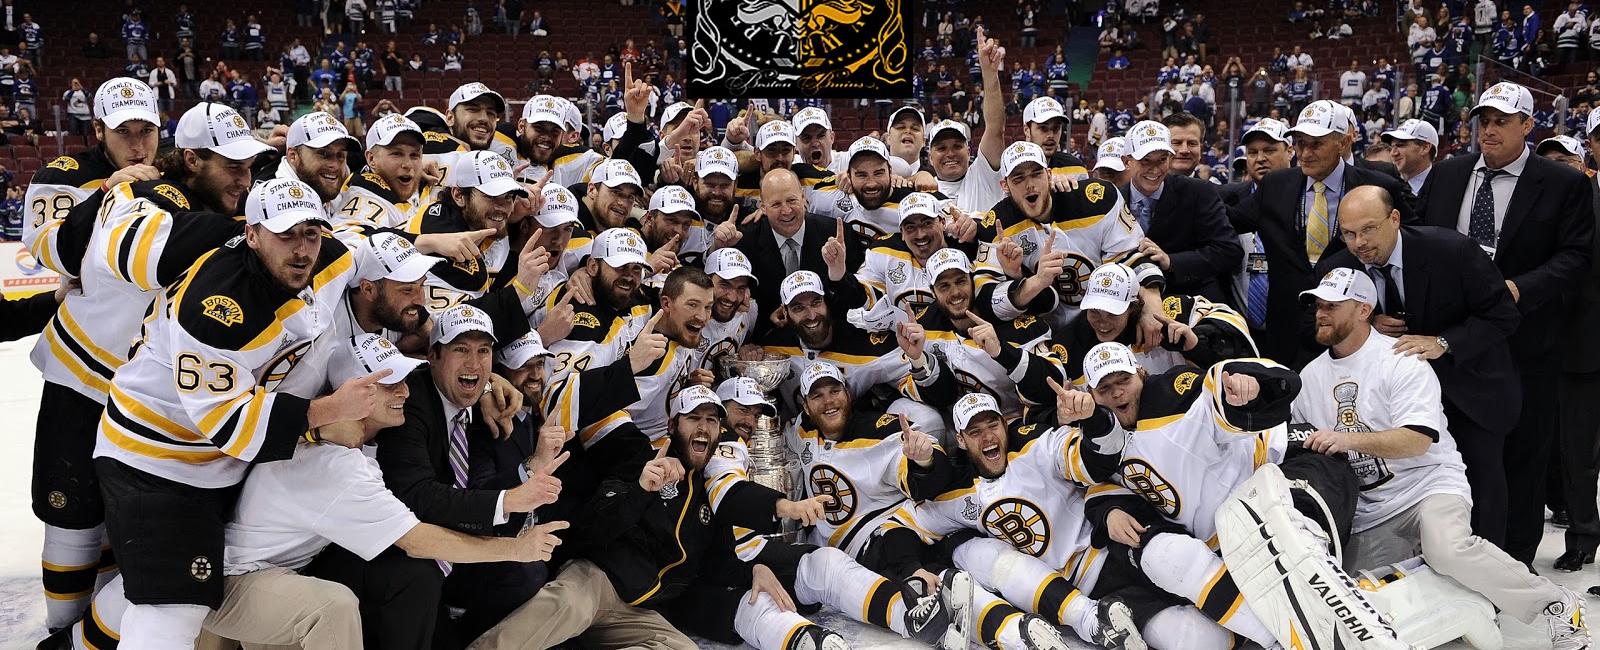 The boston bruins name is spelled bqstqn bruins on the stanley cup for their 1971 72 title